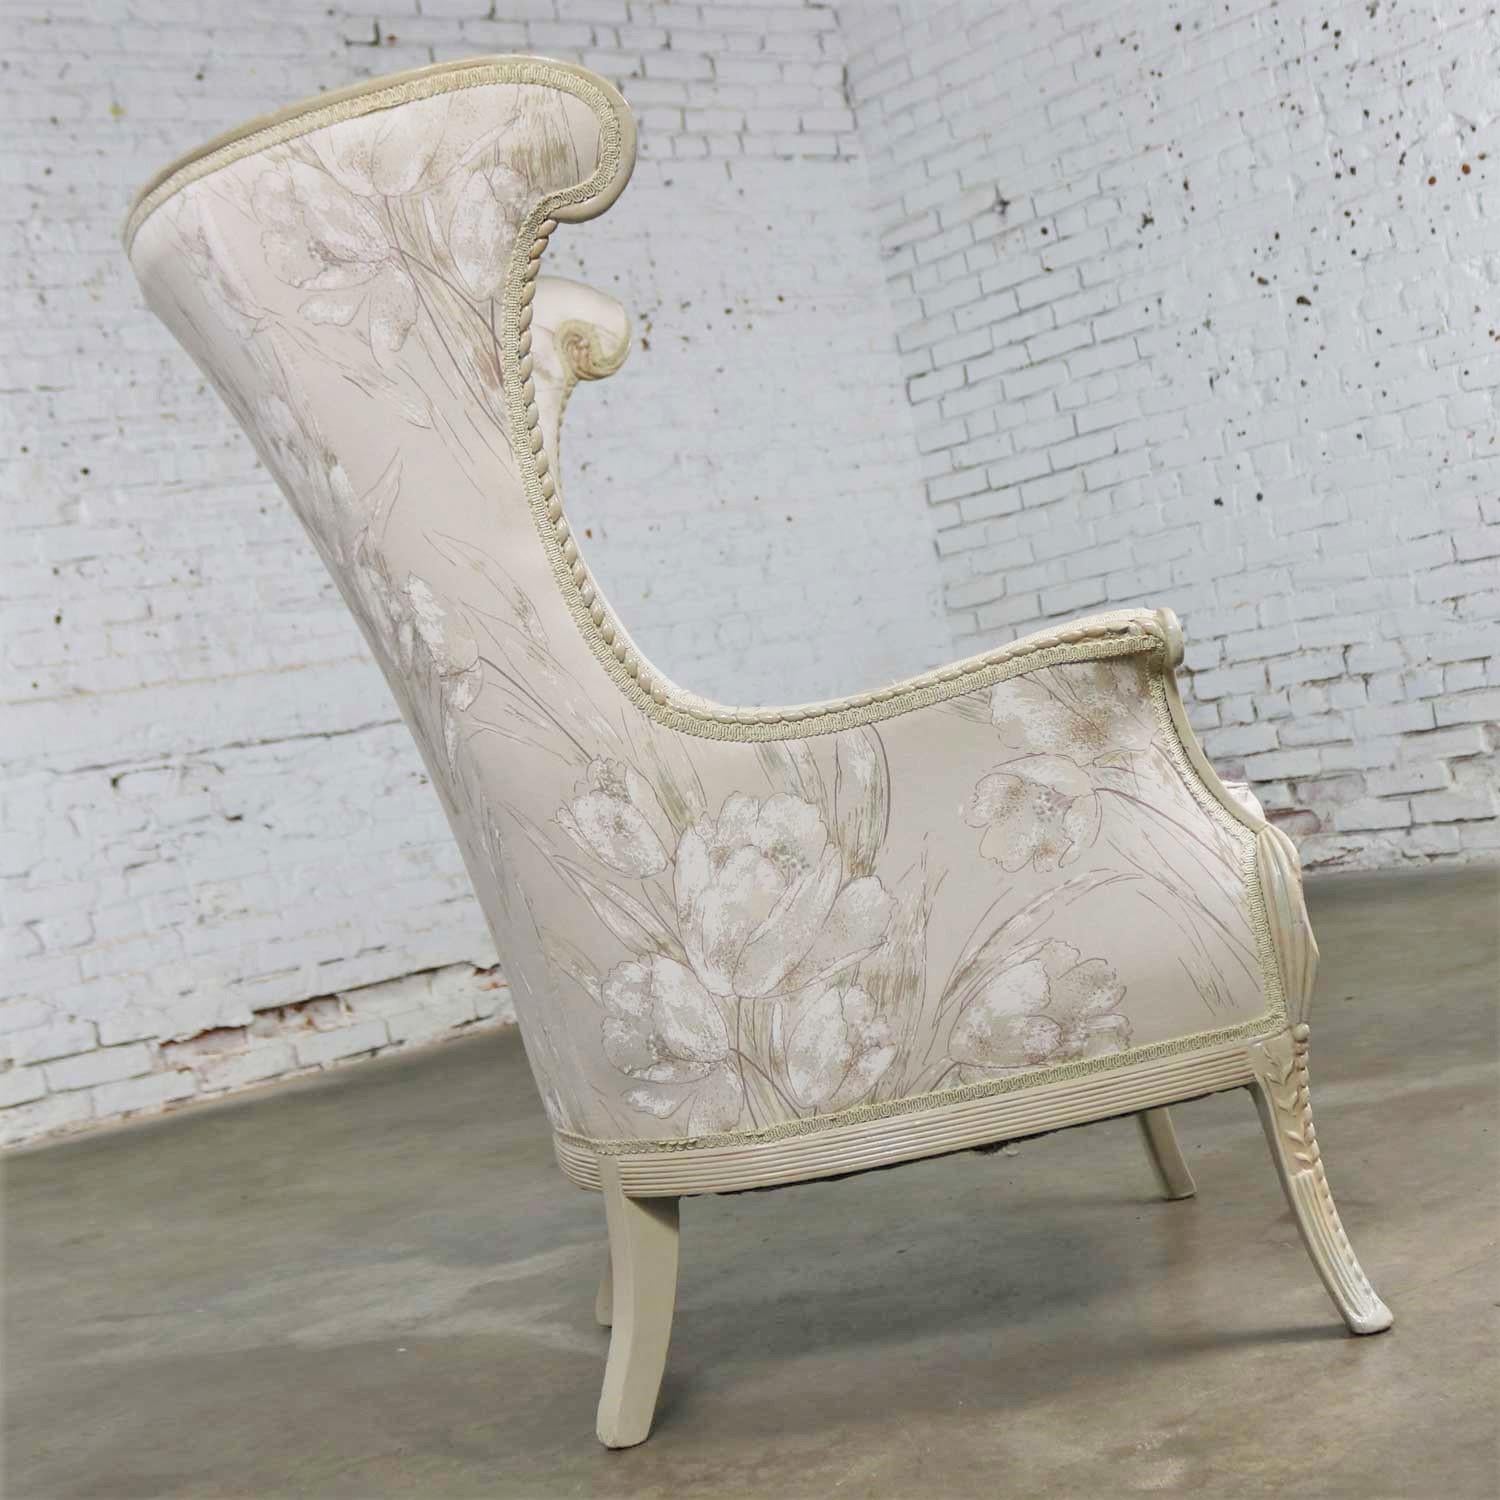 Painted Neoclassic French Style Large Wingback Lounge Chair in Antique White